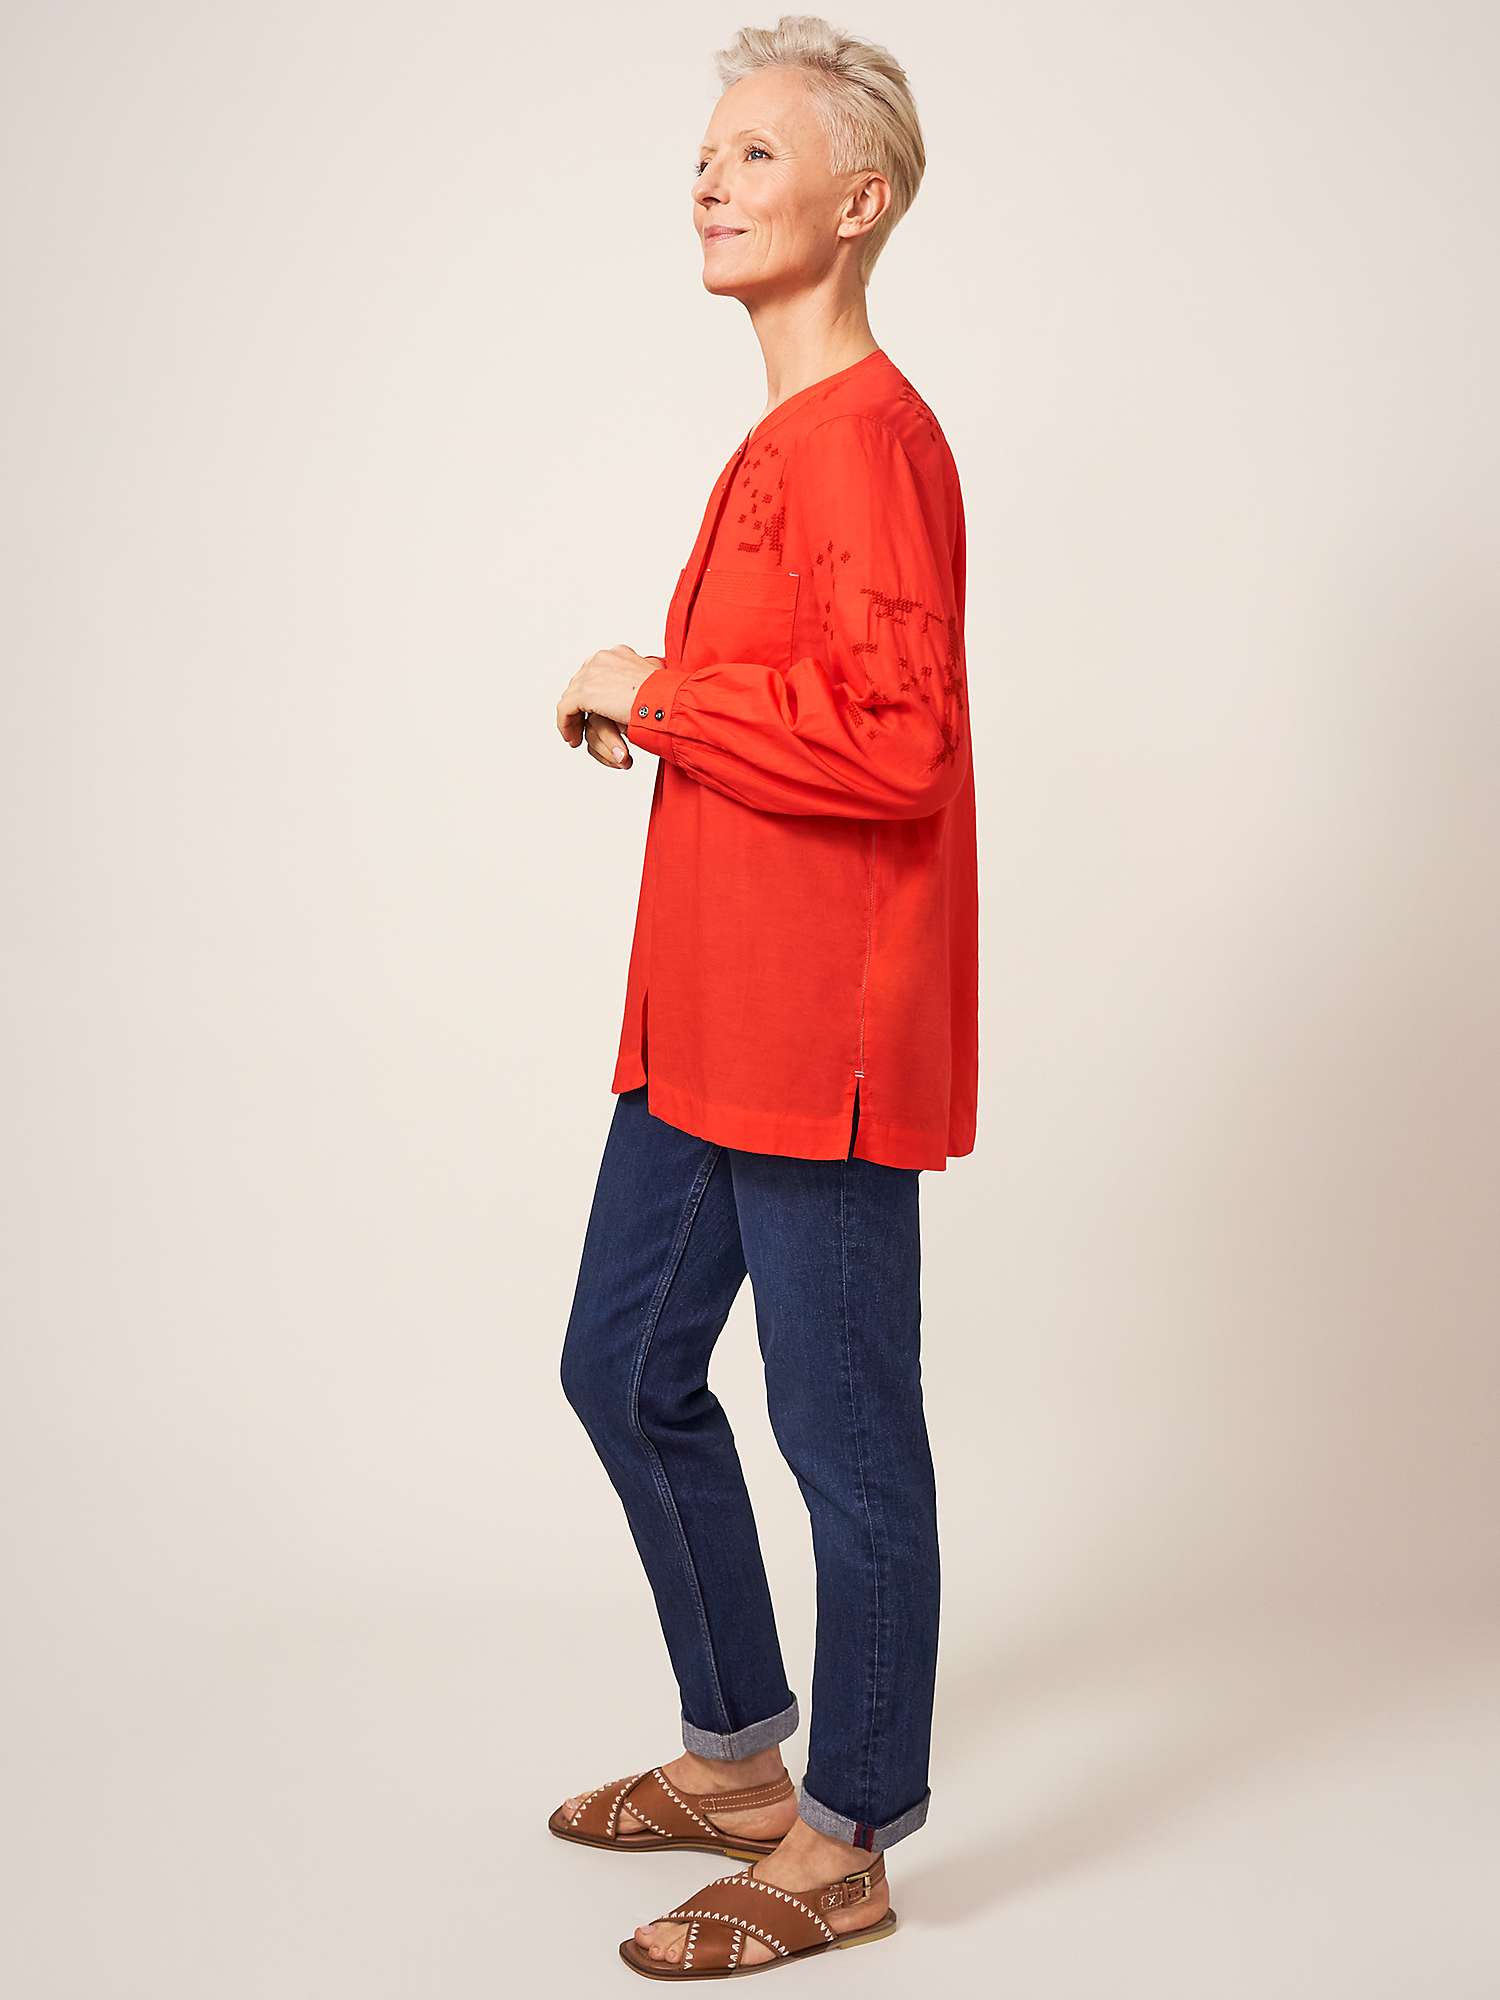 Buy White Stuff Marta Embroidered Cotton Blend Shirt, Red Online at johnlewis.com